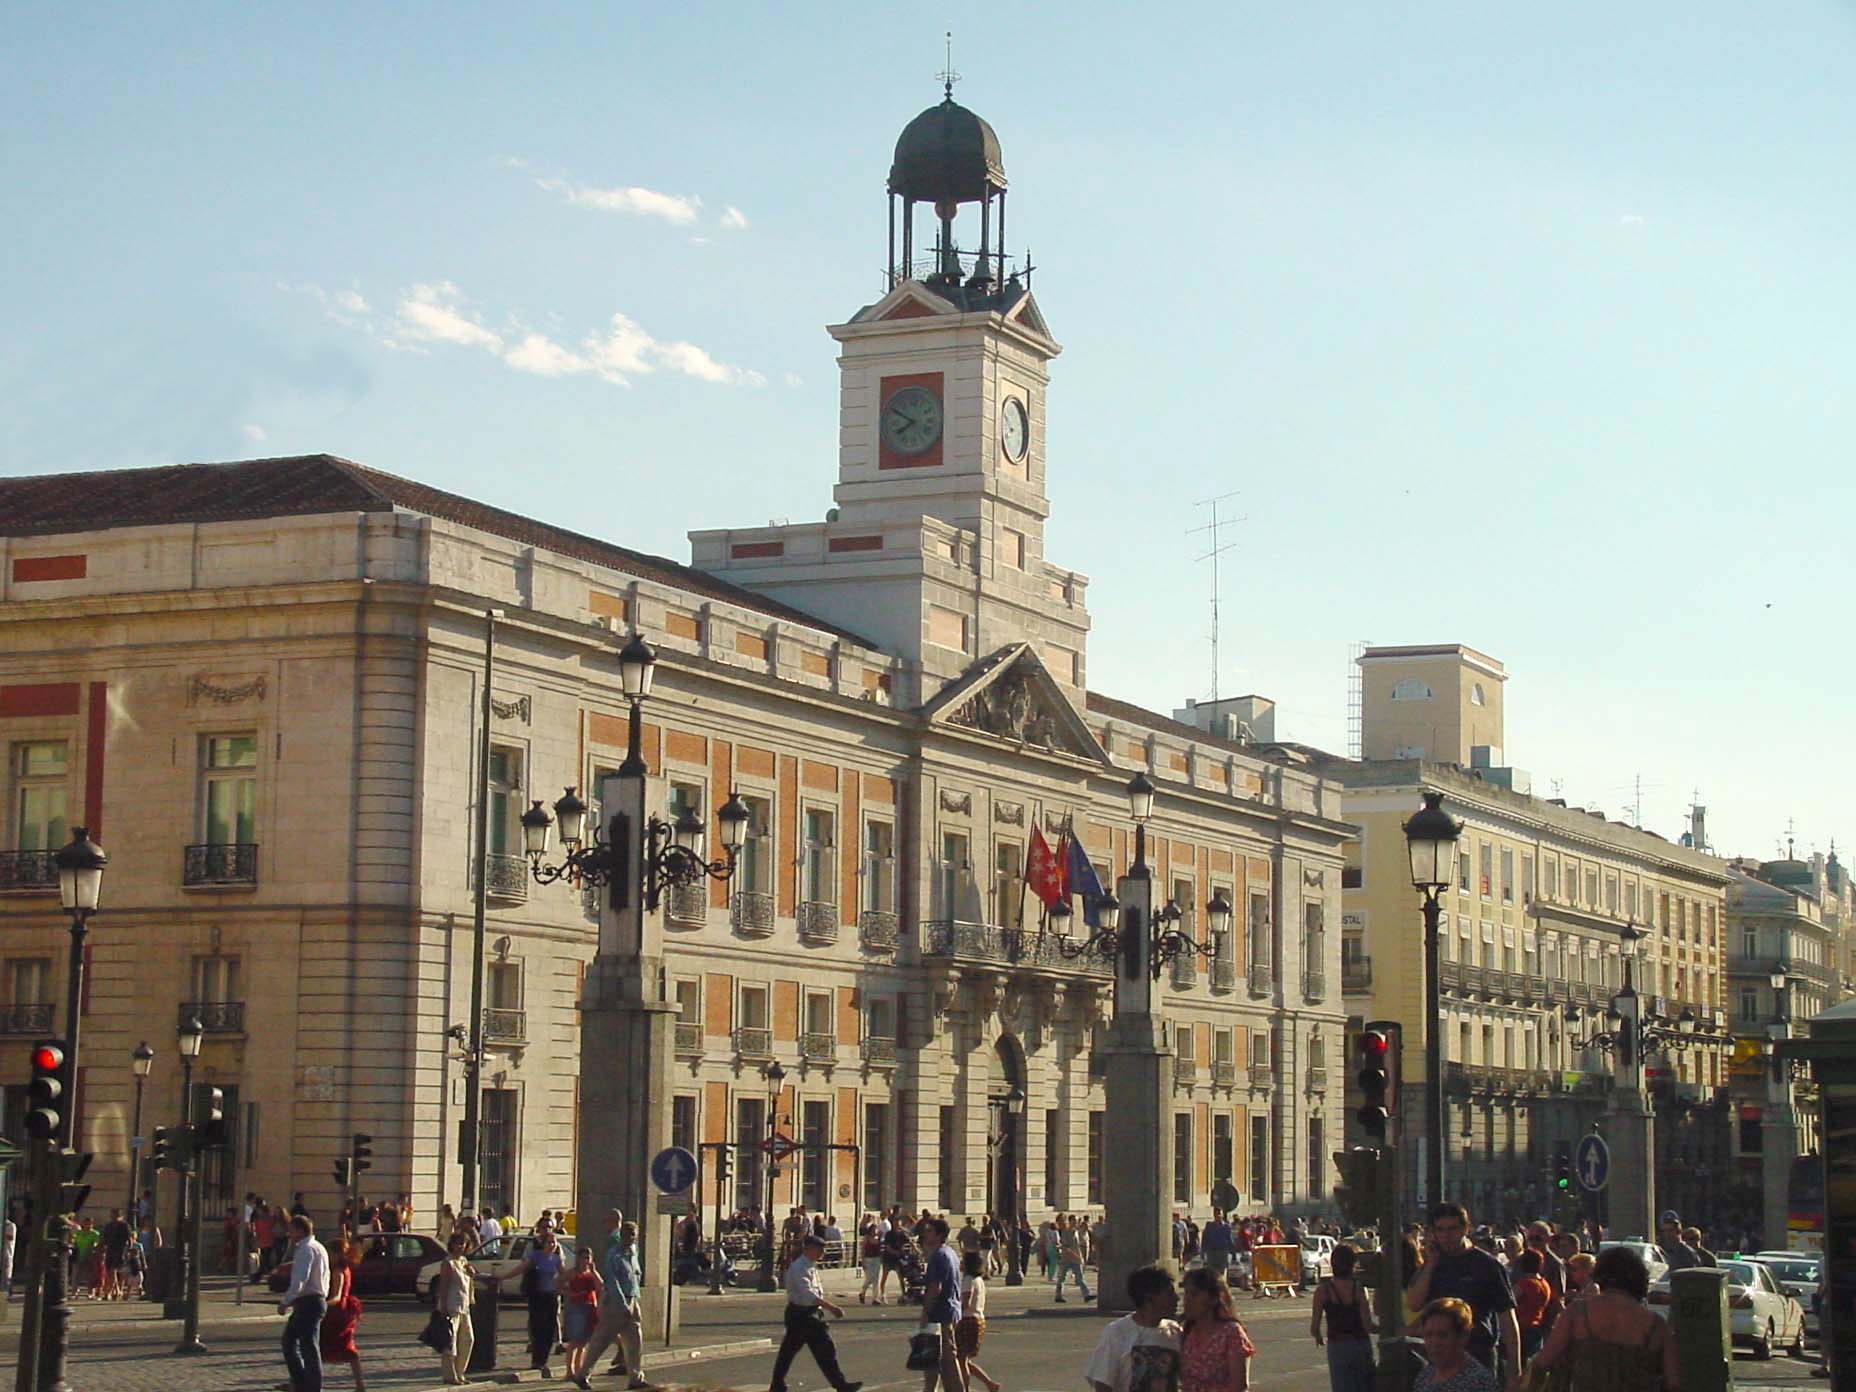 A visit to Puerta del Sol in Madrid